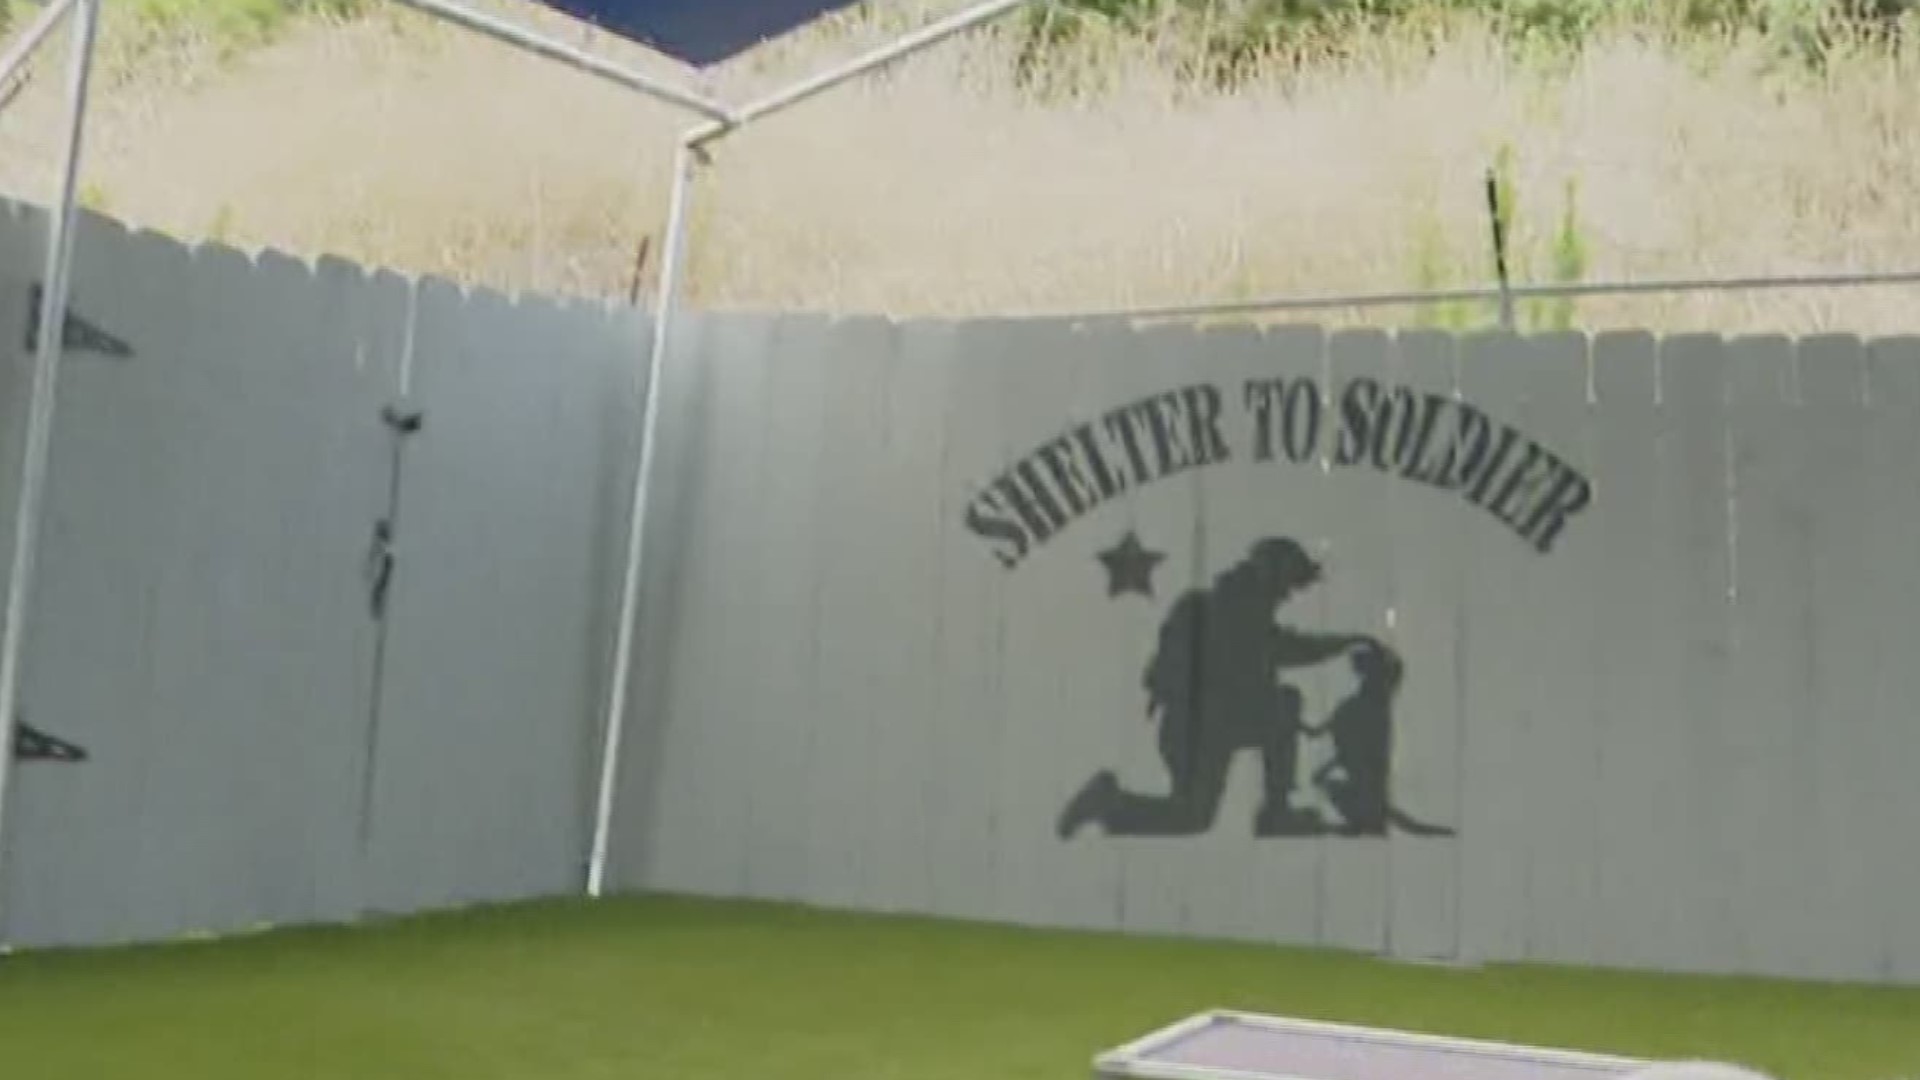 Shelter to Soldier rescues dogs from shelters, pairs them with veterans in need, and then gives them both the training to succeed.